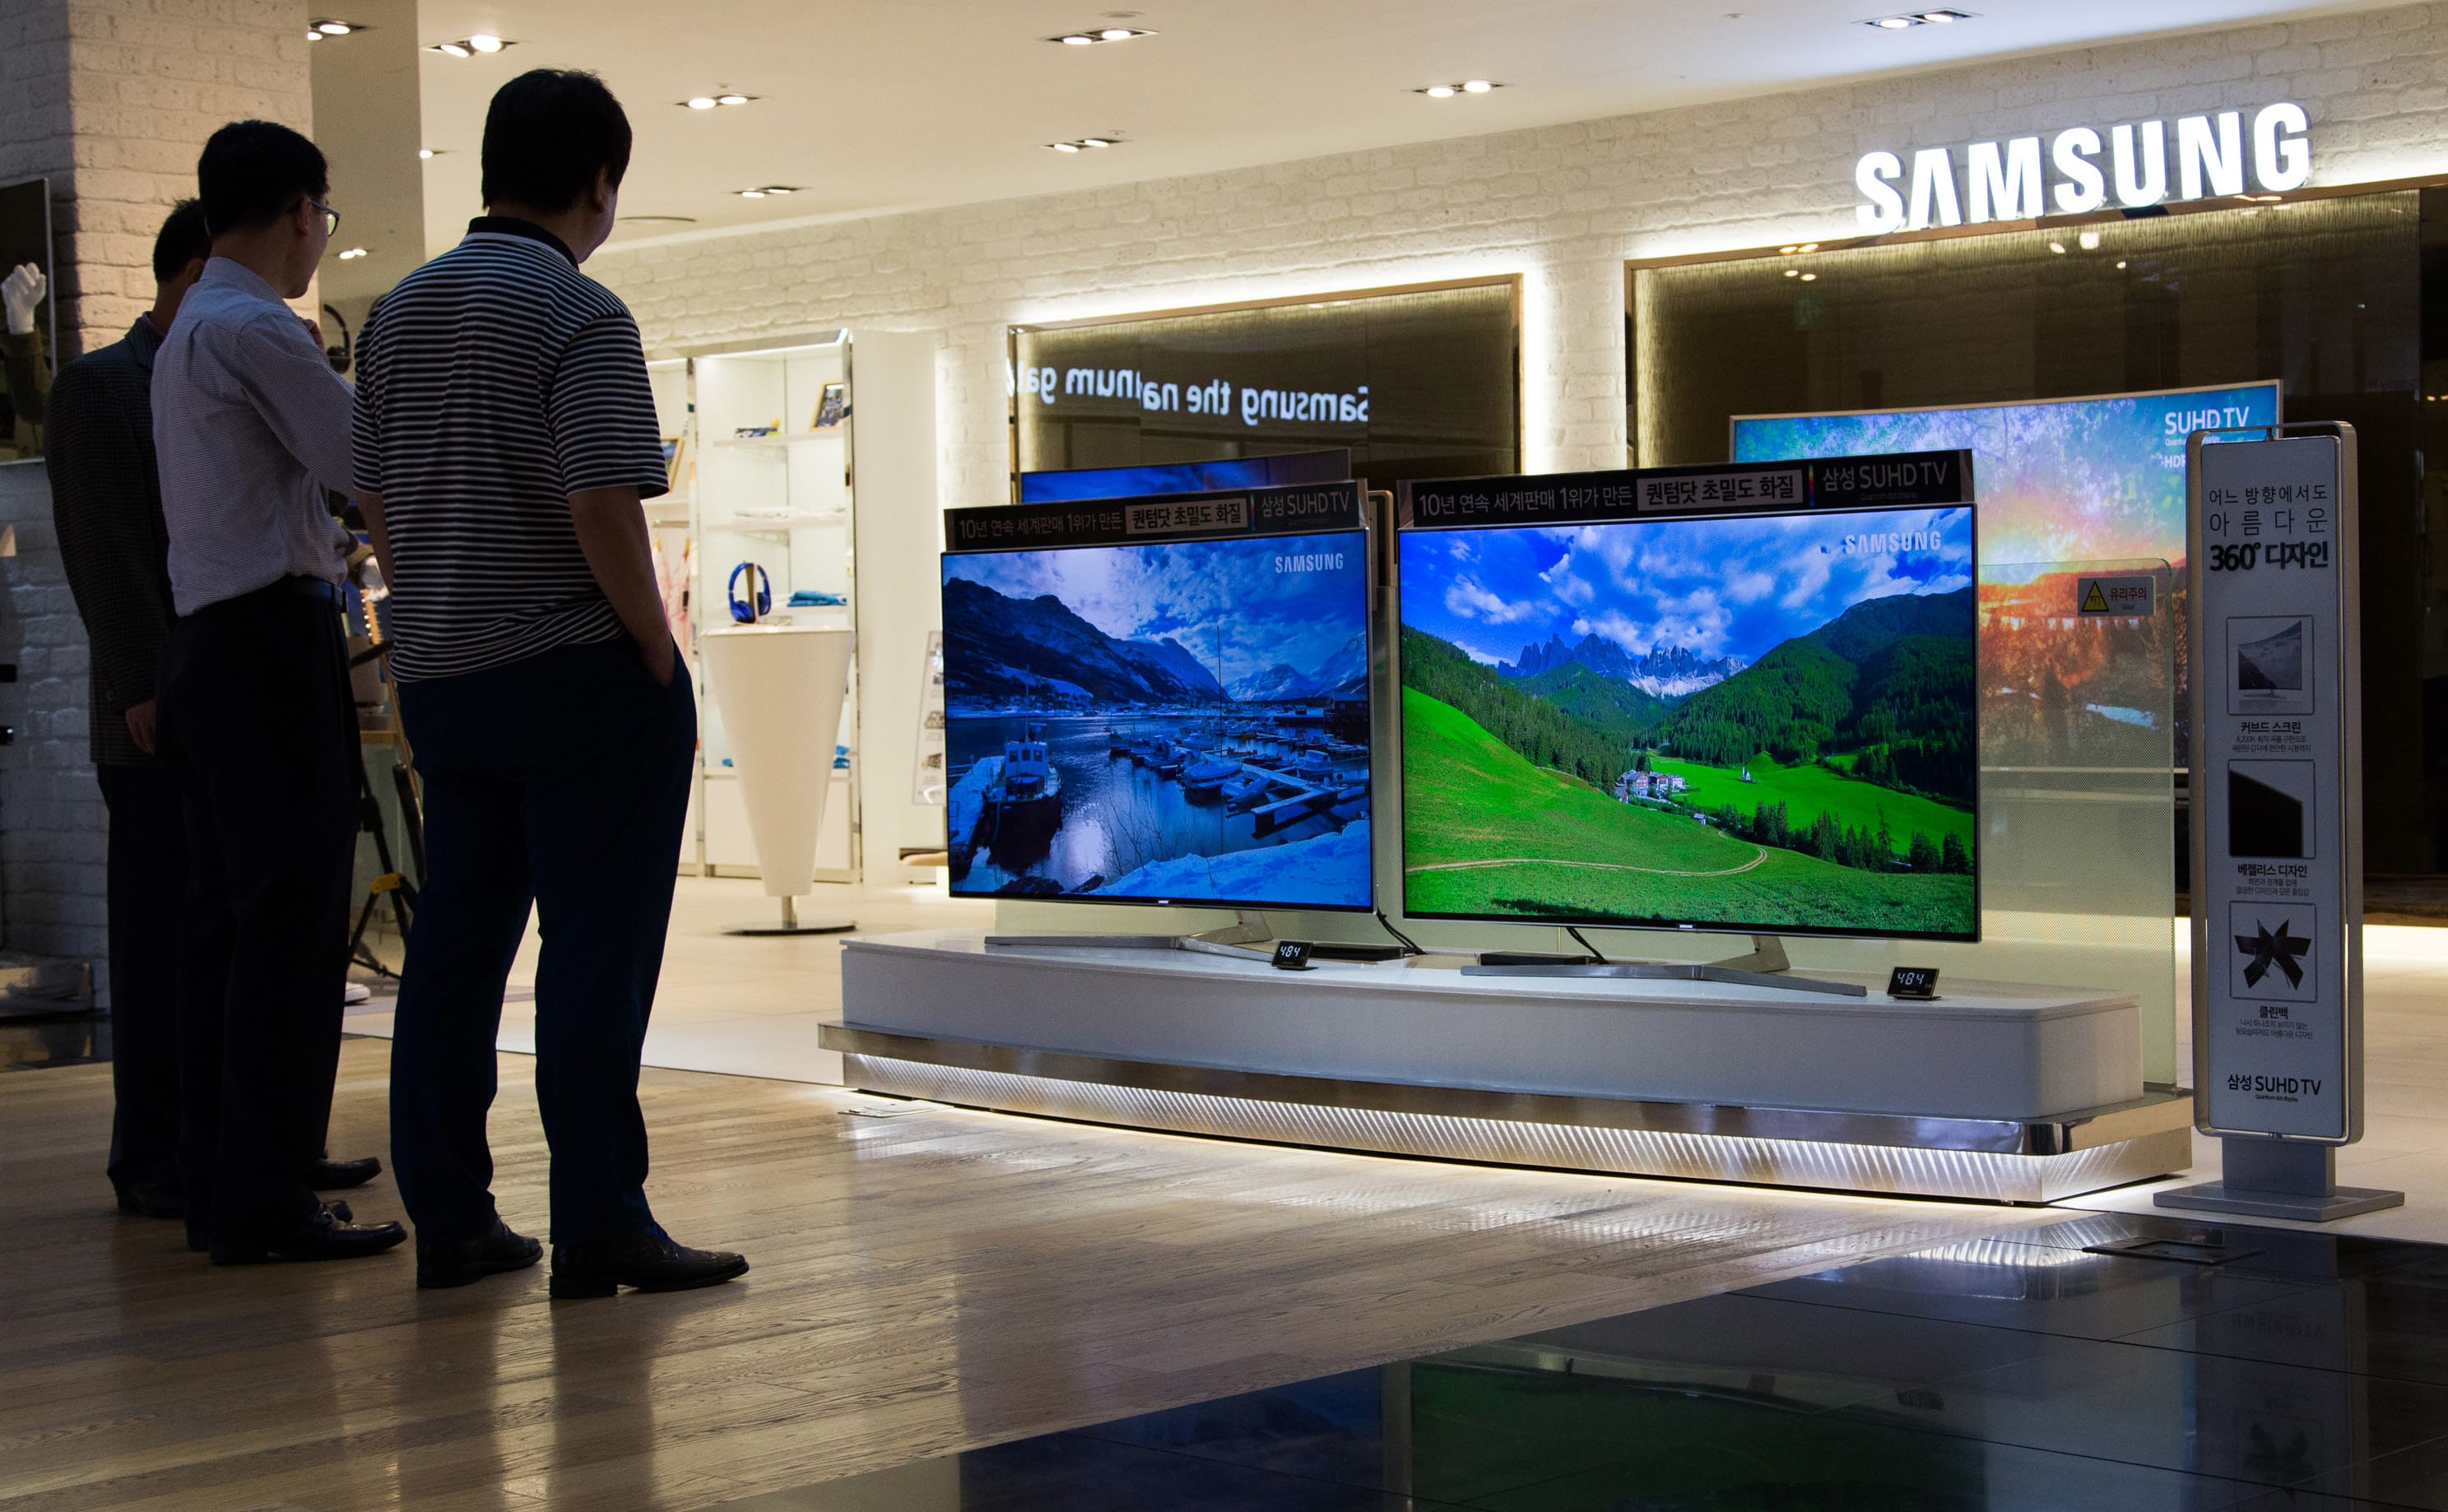 Fix All the Erros with Samsung Smart TV Apps on Smart Hub